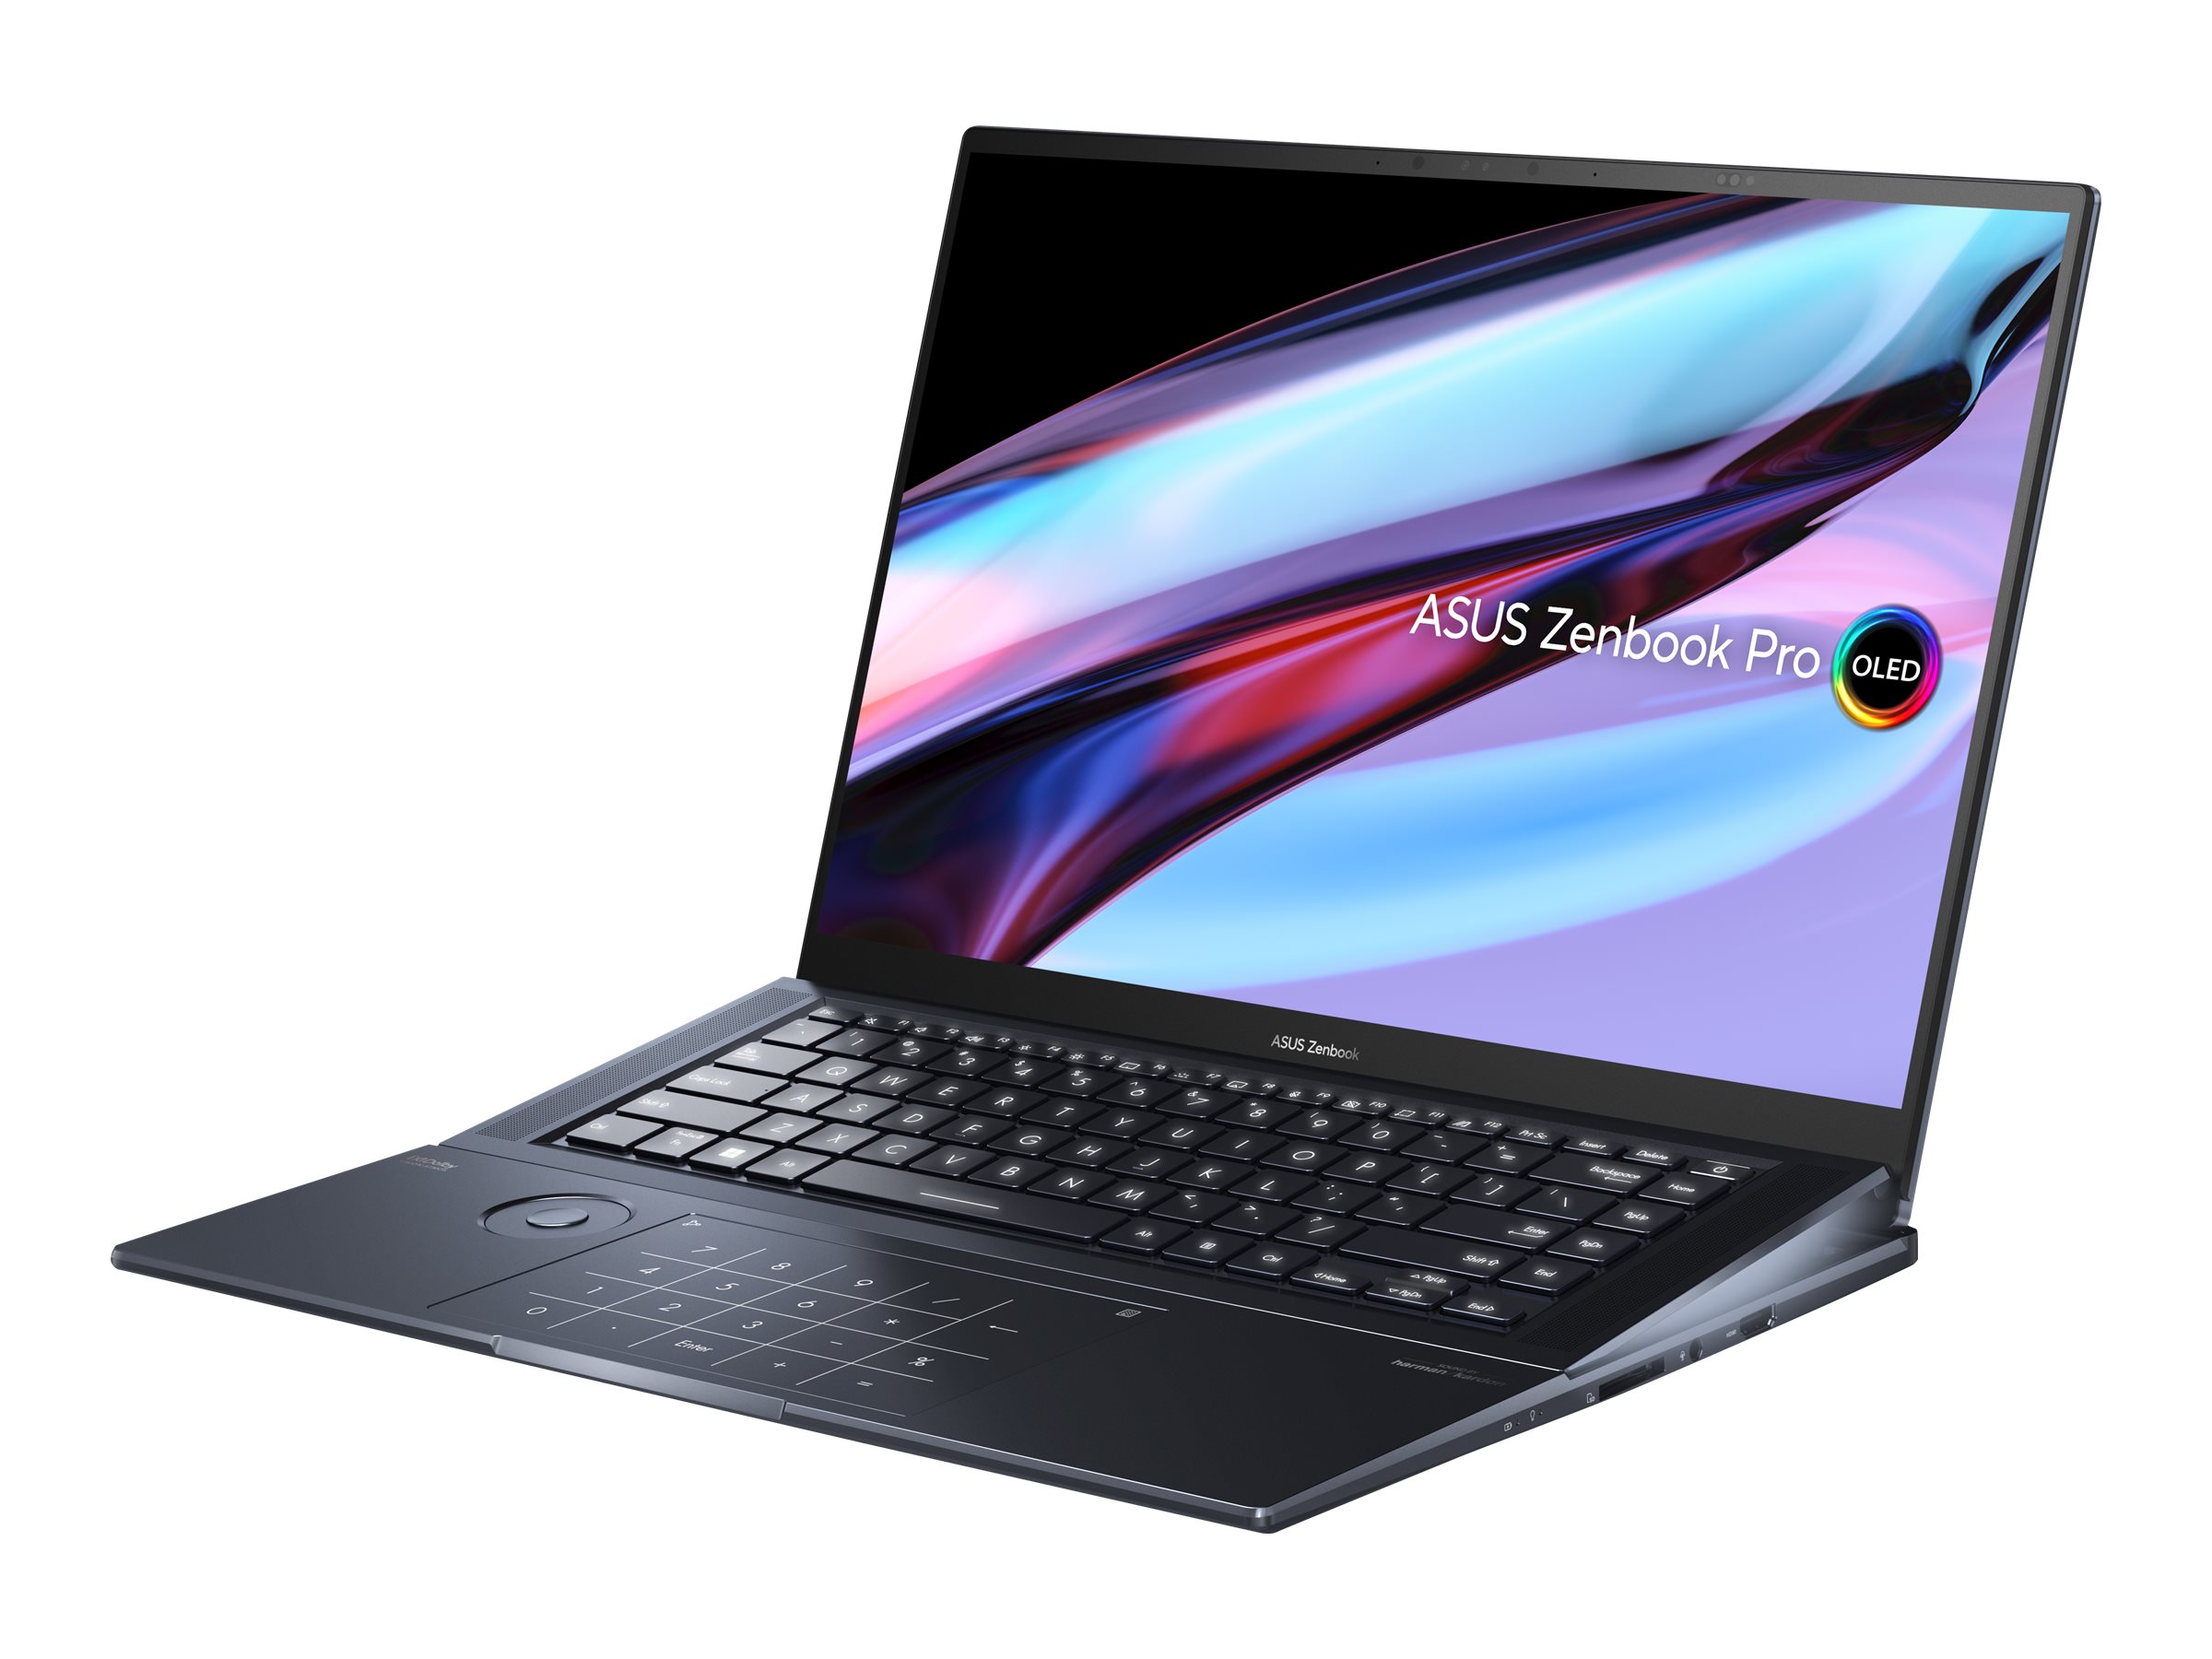 ASUS Zenbook Pro 15 UX580｜Laptops For Home｜ASUS USA